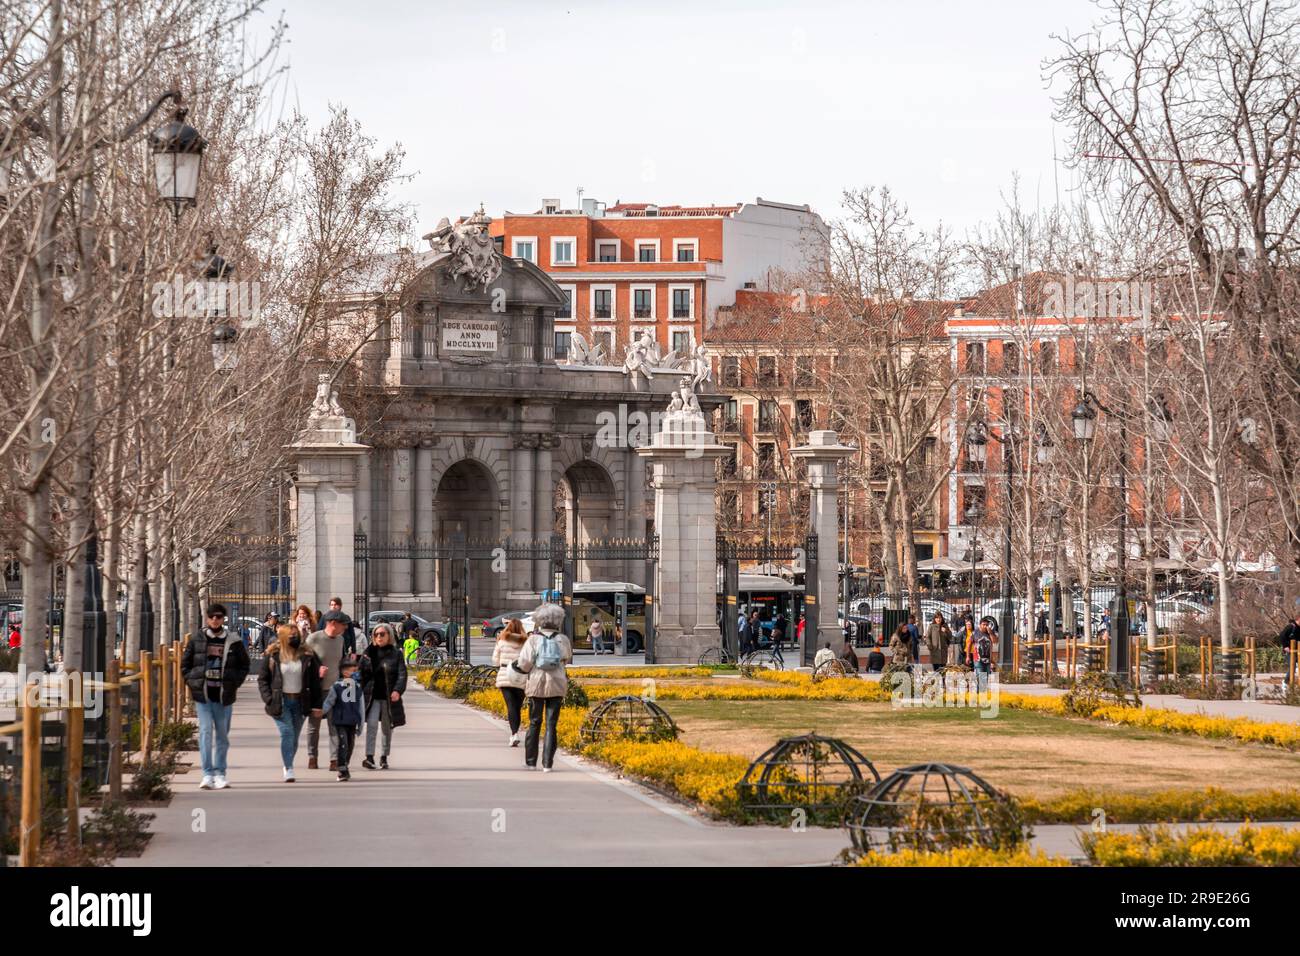 Madrid, Spain - Feb 16, 2022: The Puerta de Alcala is a Neoclassical gate in the Plaza de la Independencia in Madrid, Spain. Stock Photo